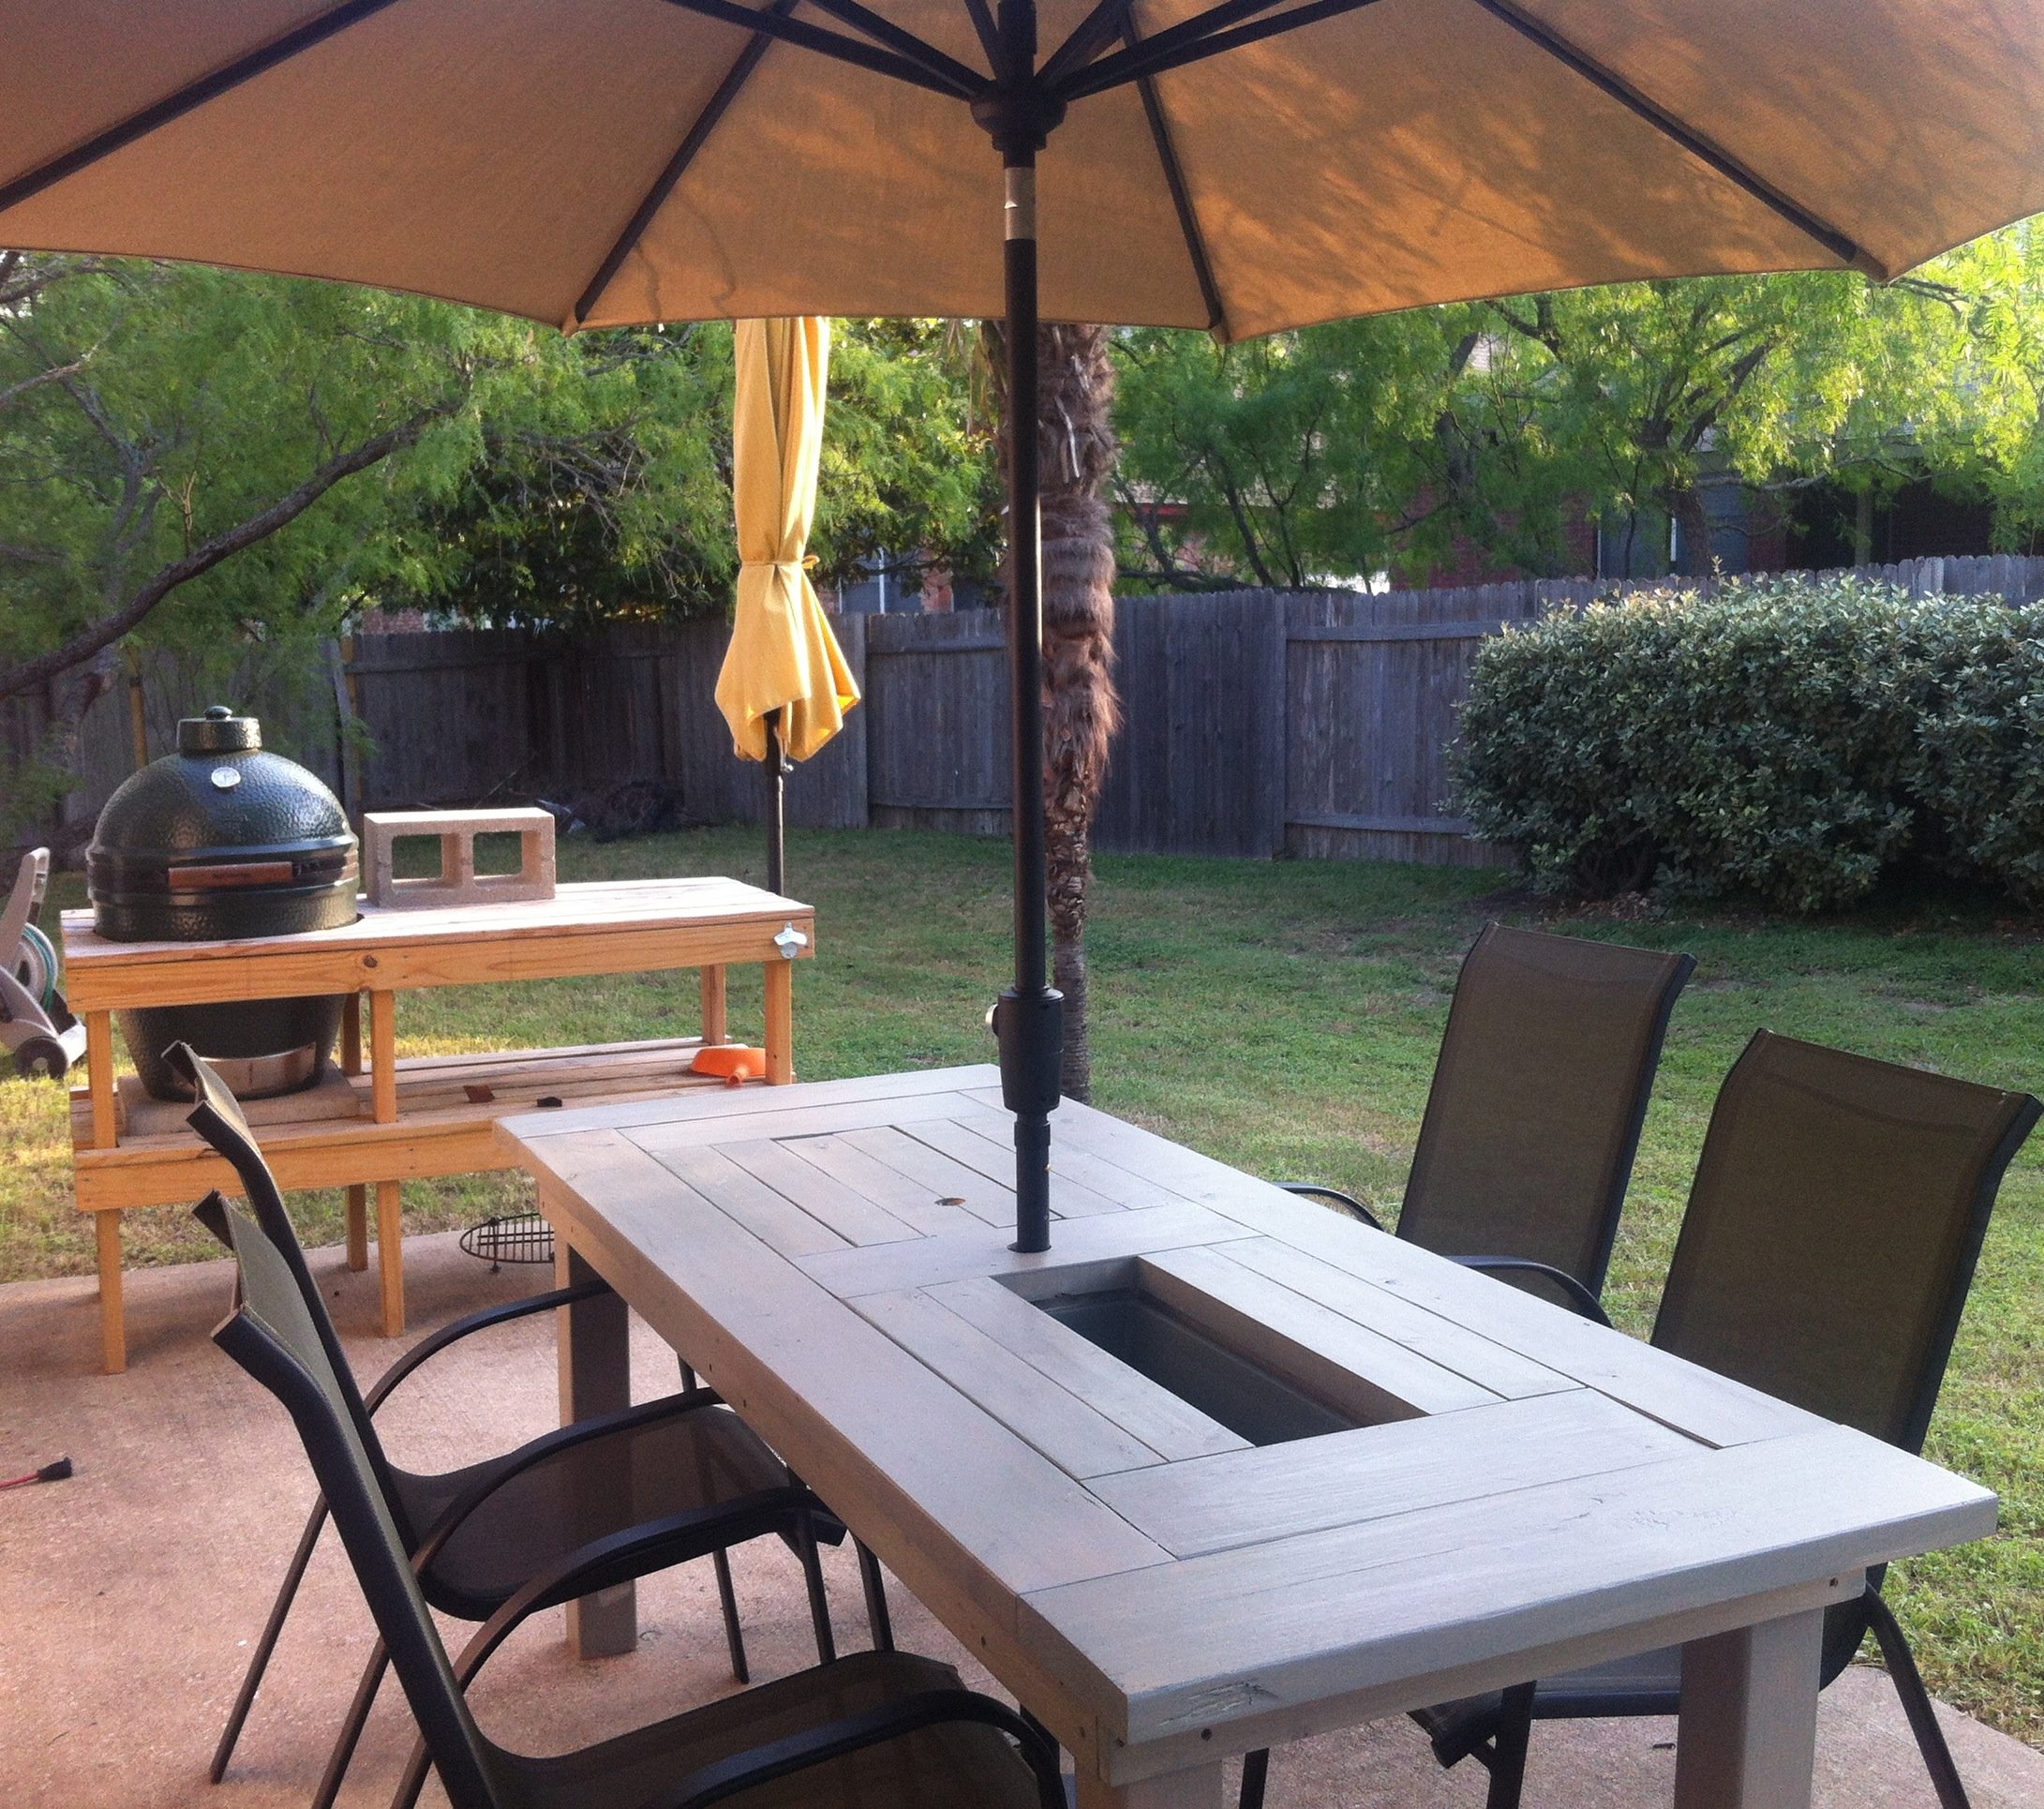 Patio Table with Built-in Beer/Wine Coolers Ana White